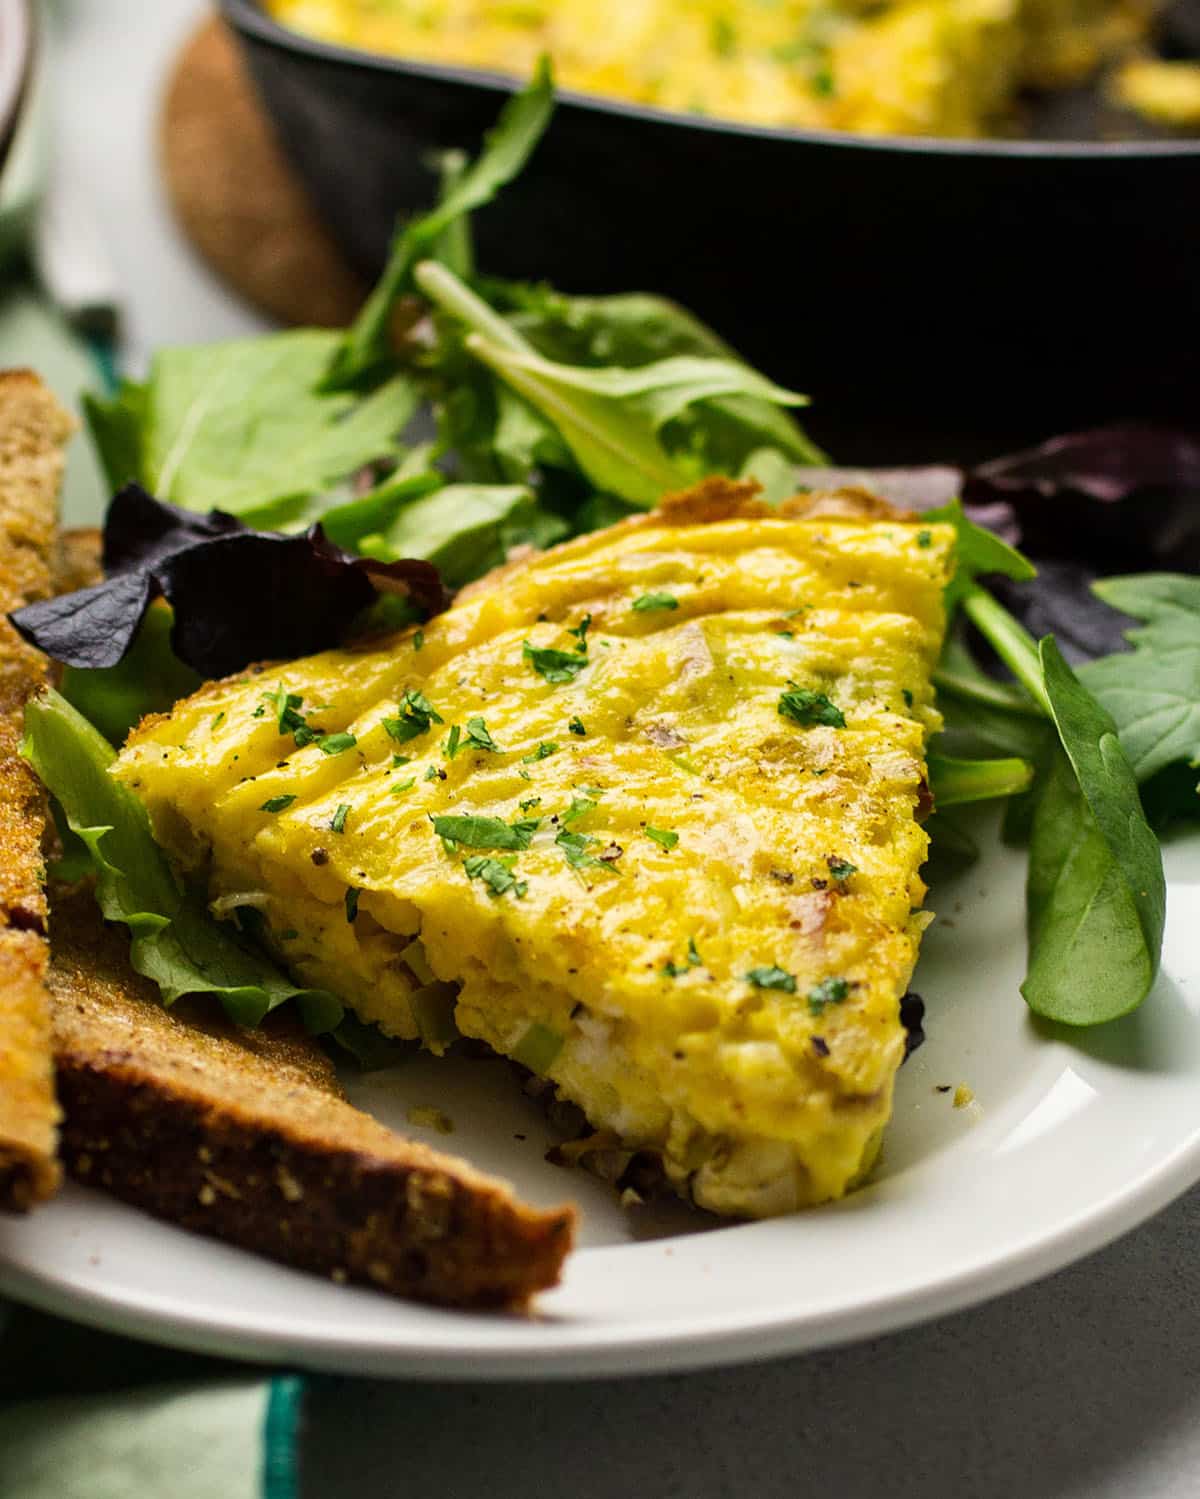 Slice of leek frittata on a plate with salad.